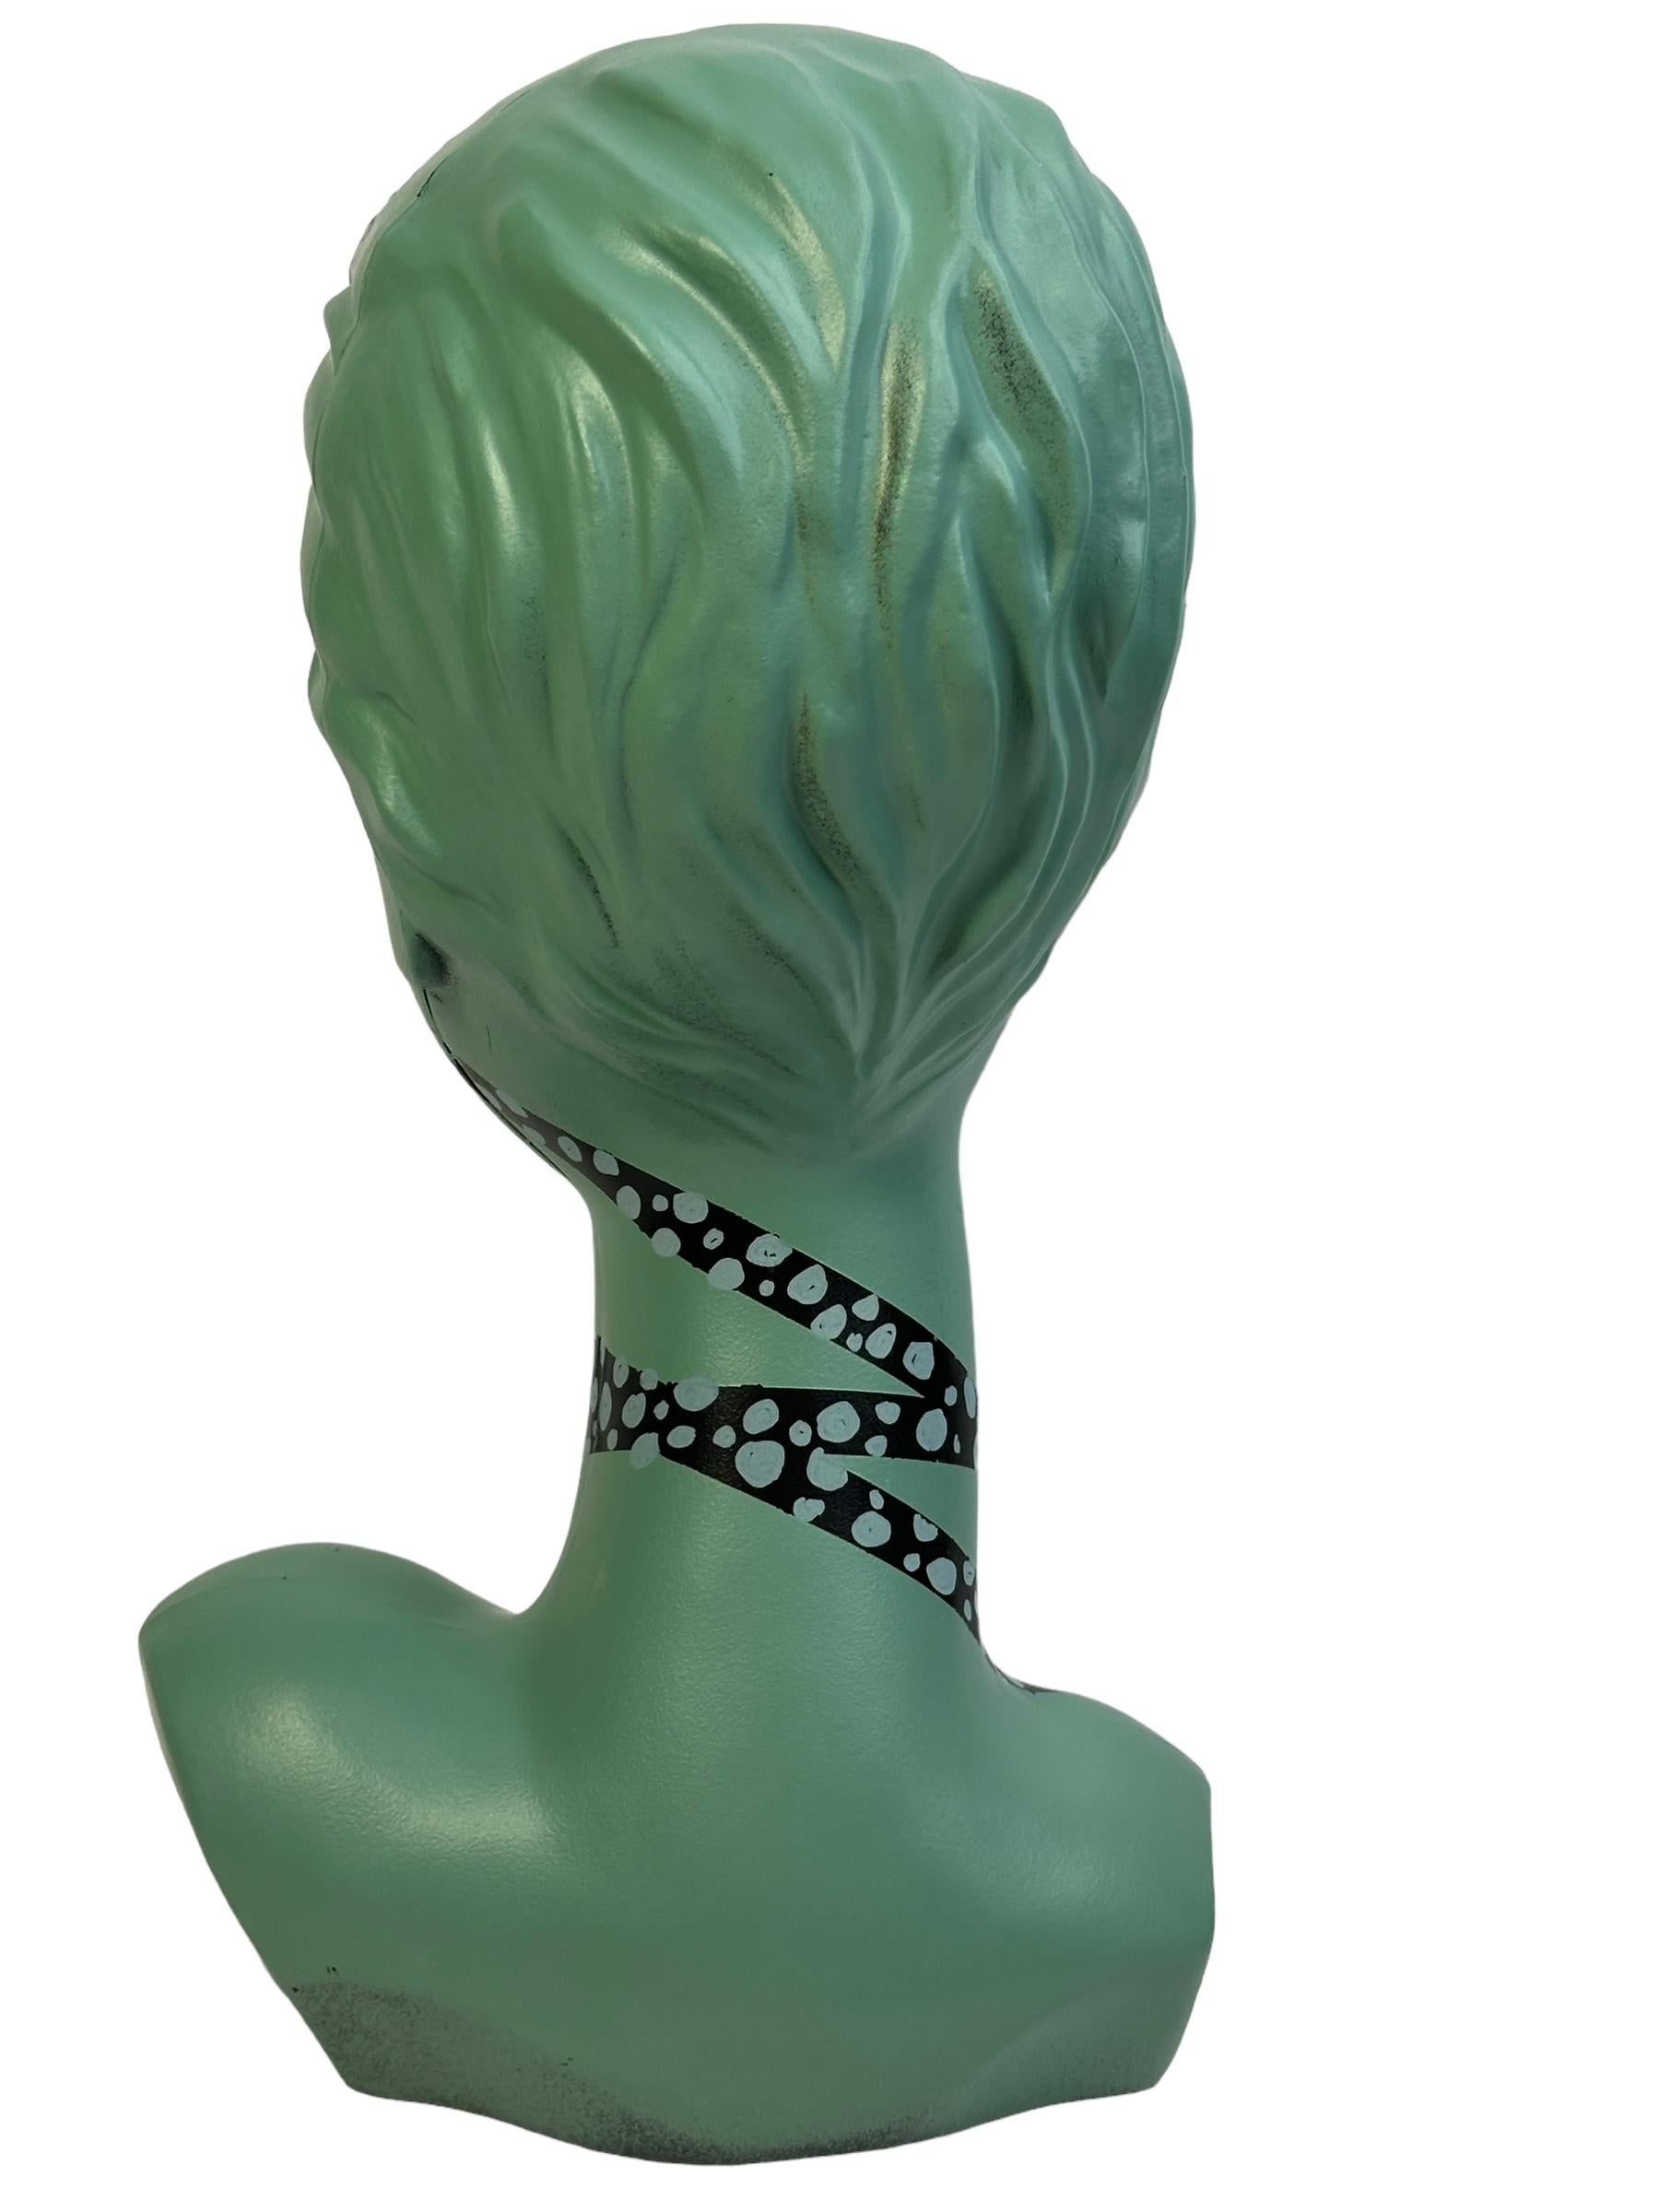 Iconic Popart Mannequin Twiggy Model Head Vintage German, Space Age Design In Good Condition For Sale In Nuernberg, DE